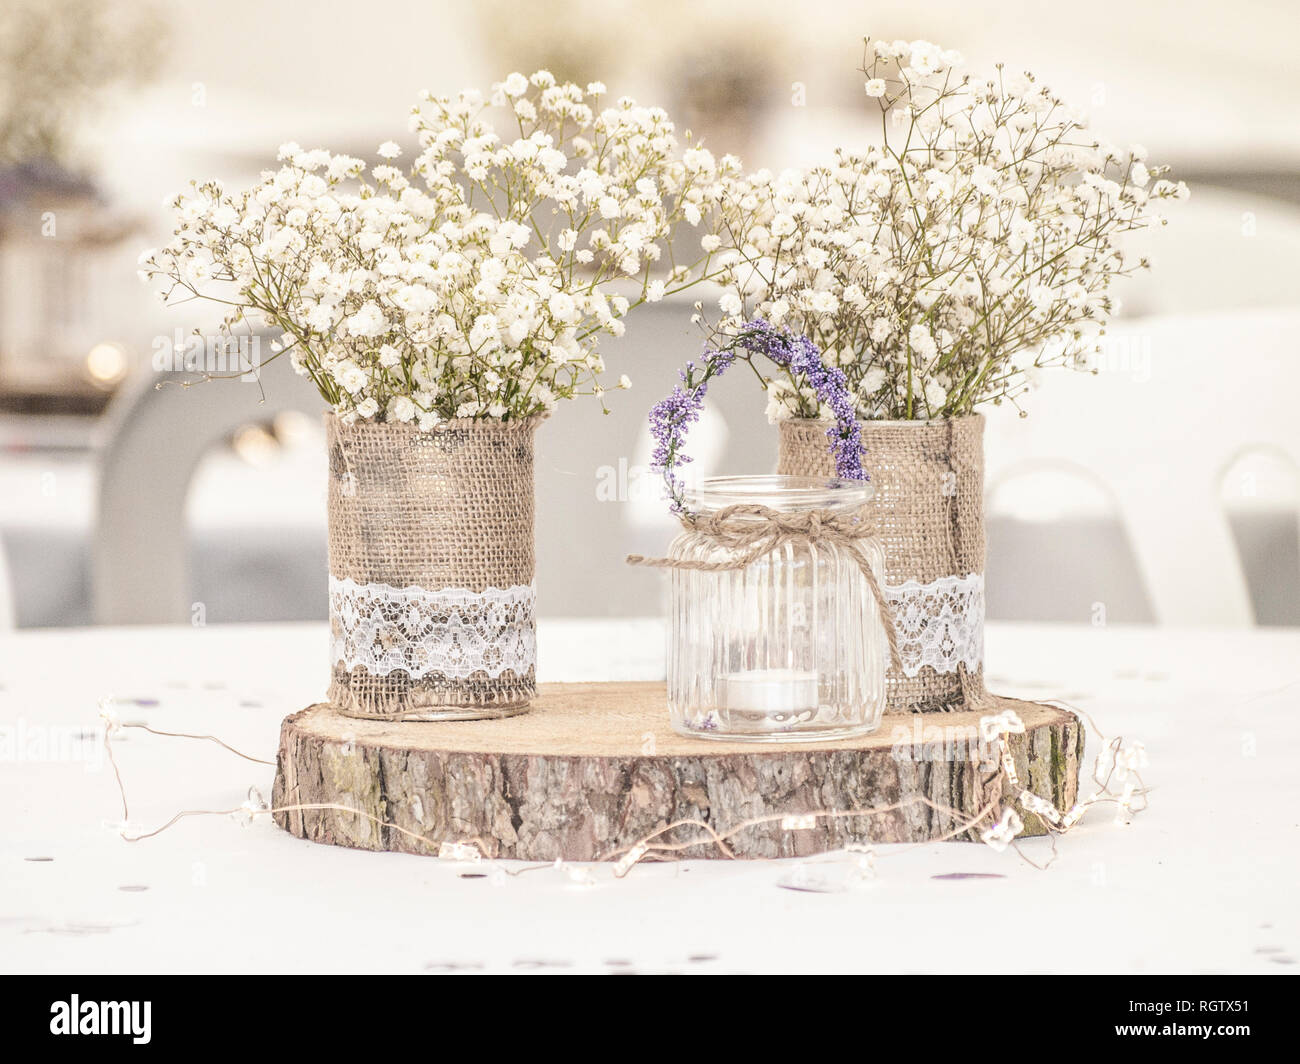 Casual And Rustic Wedding Table Setting Stock Photo Alamy